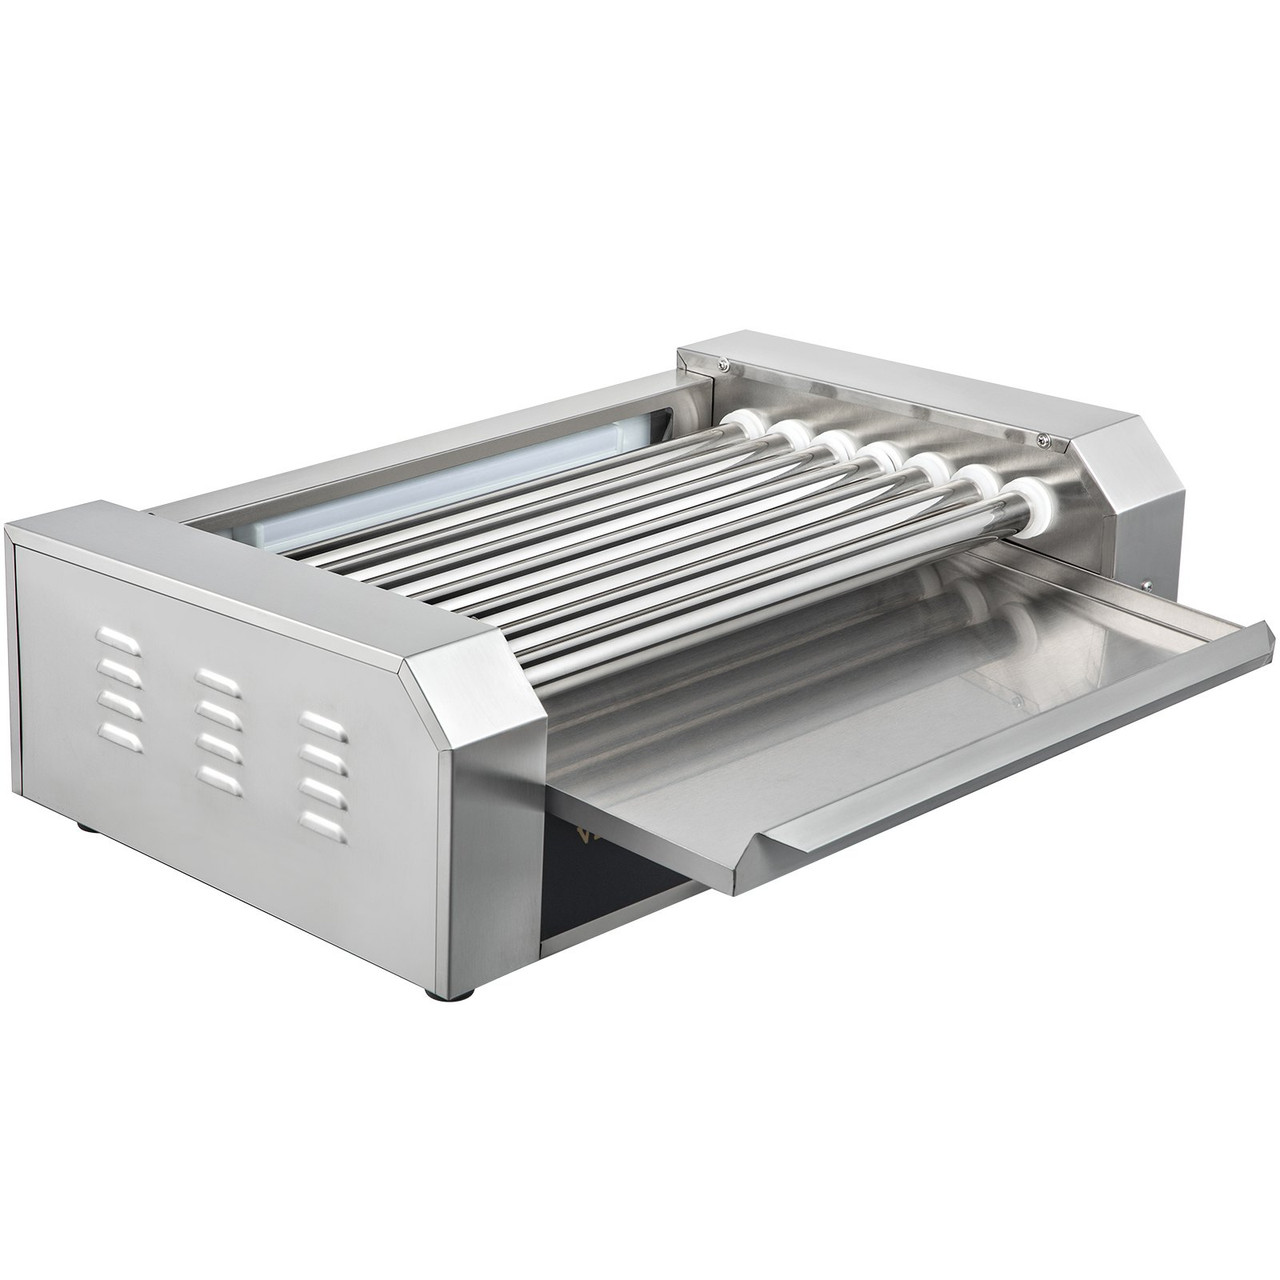 Hot Dog Roller, 18 Hot Dog Capacity 7 Rollers, 1050W Stainless Steel Cook Warmer Machine with Dual Temp Control, LED Light and Detachable Drip Tray,